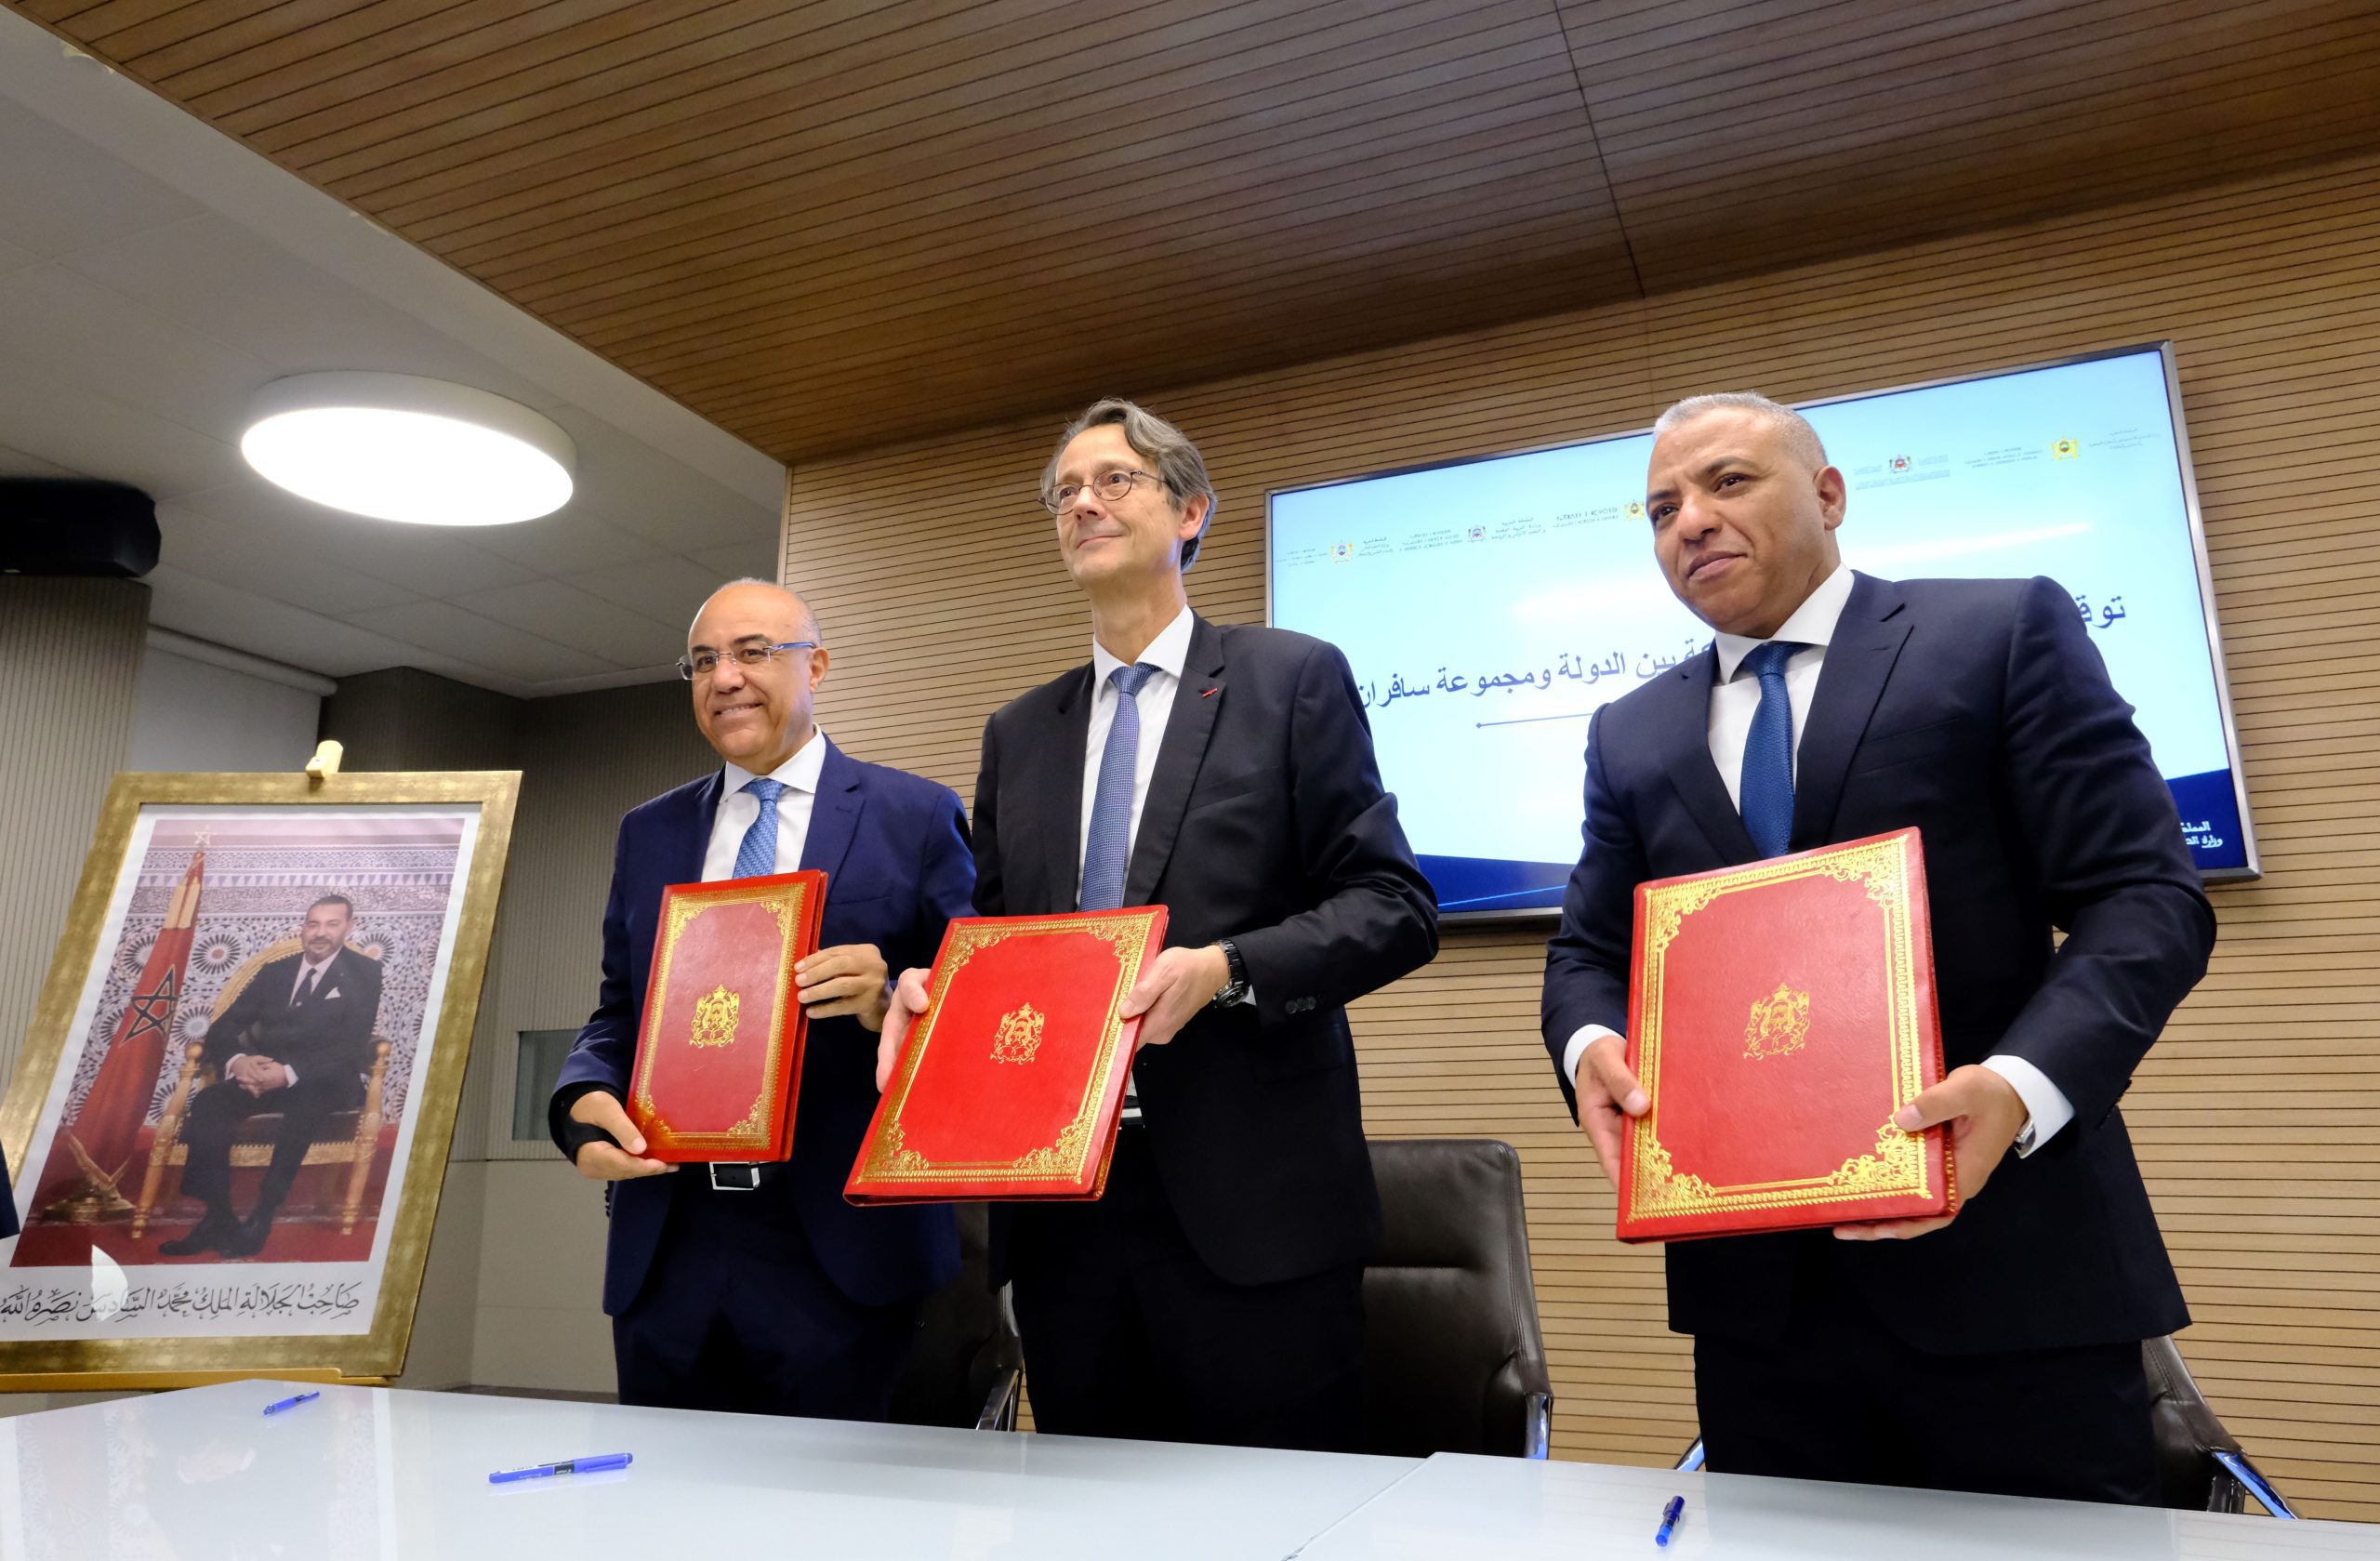 The government and Safran group signed a framework agreement on December 5 in Rabat with the aim of supporting and developing the industrial ecosystem of aeronautics in Morocco.